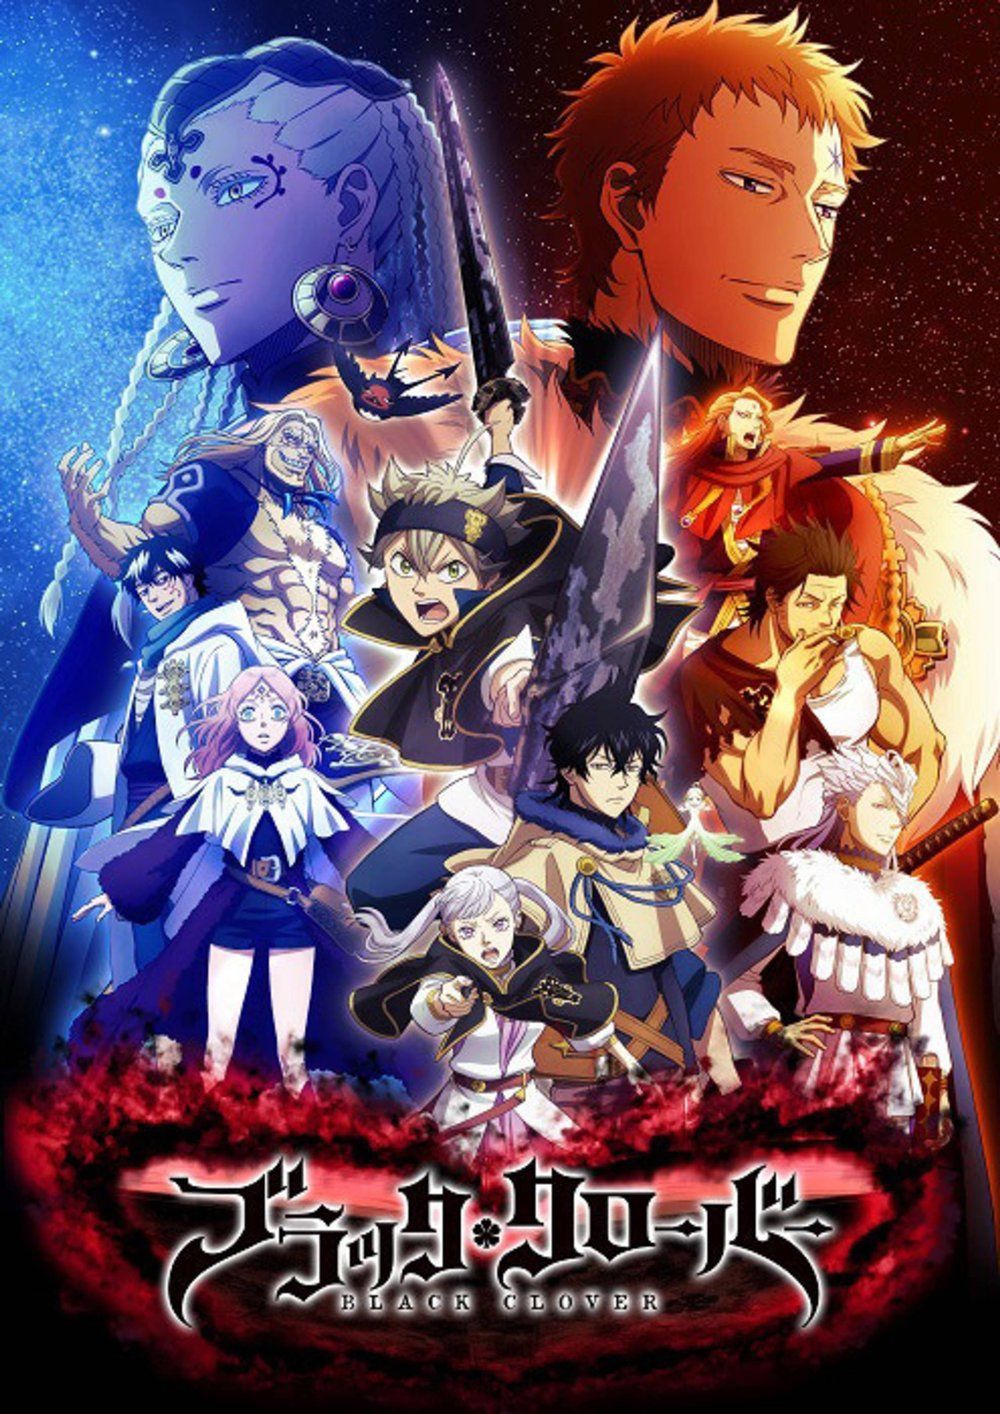 Black Clover iPhone Wallpaper Free Black Clover iPhone Background